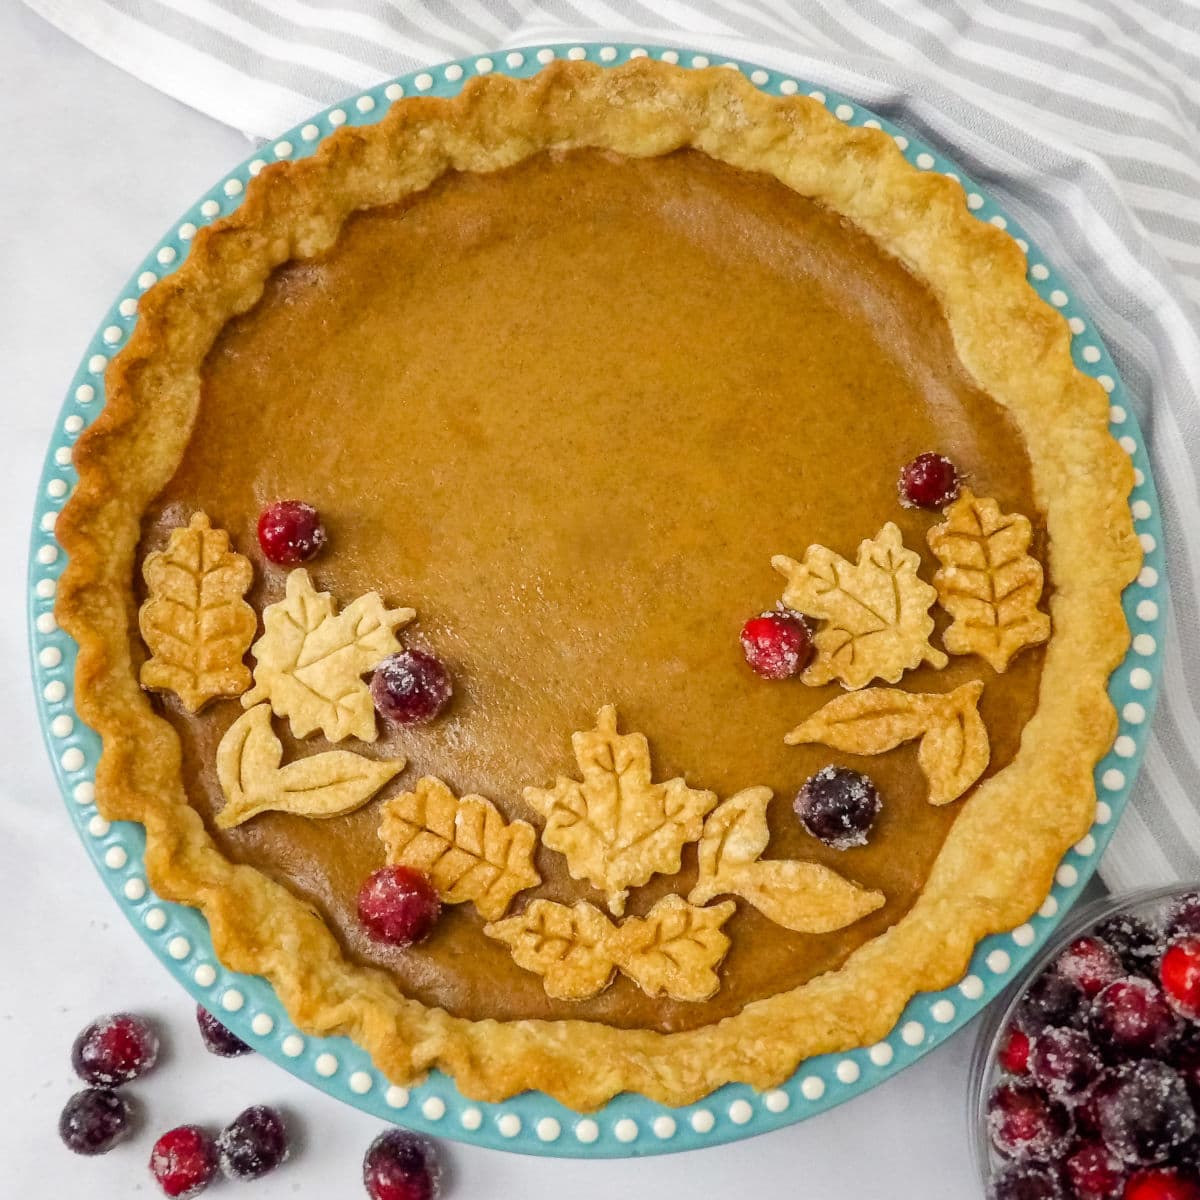 Baked homemade pumpkin pie garnished with pie leaved and sugared cranberries.